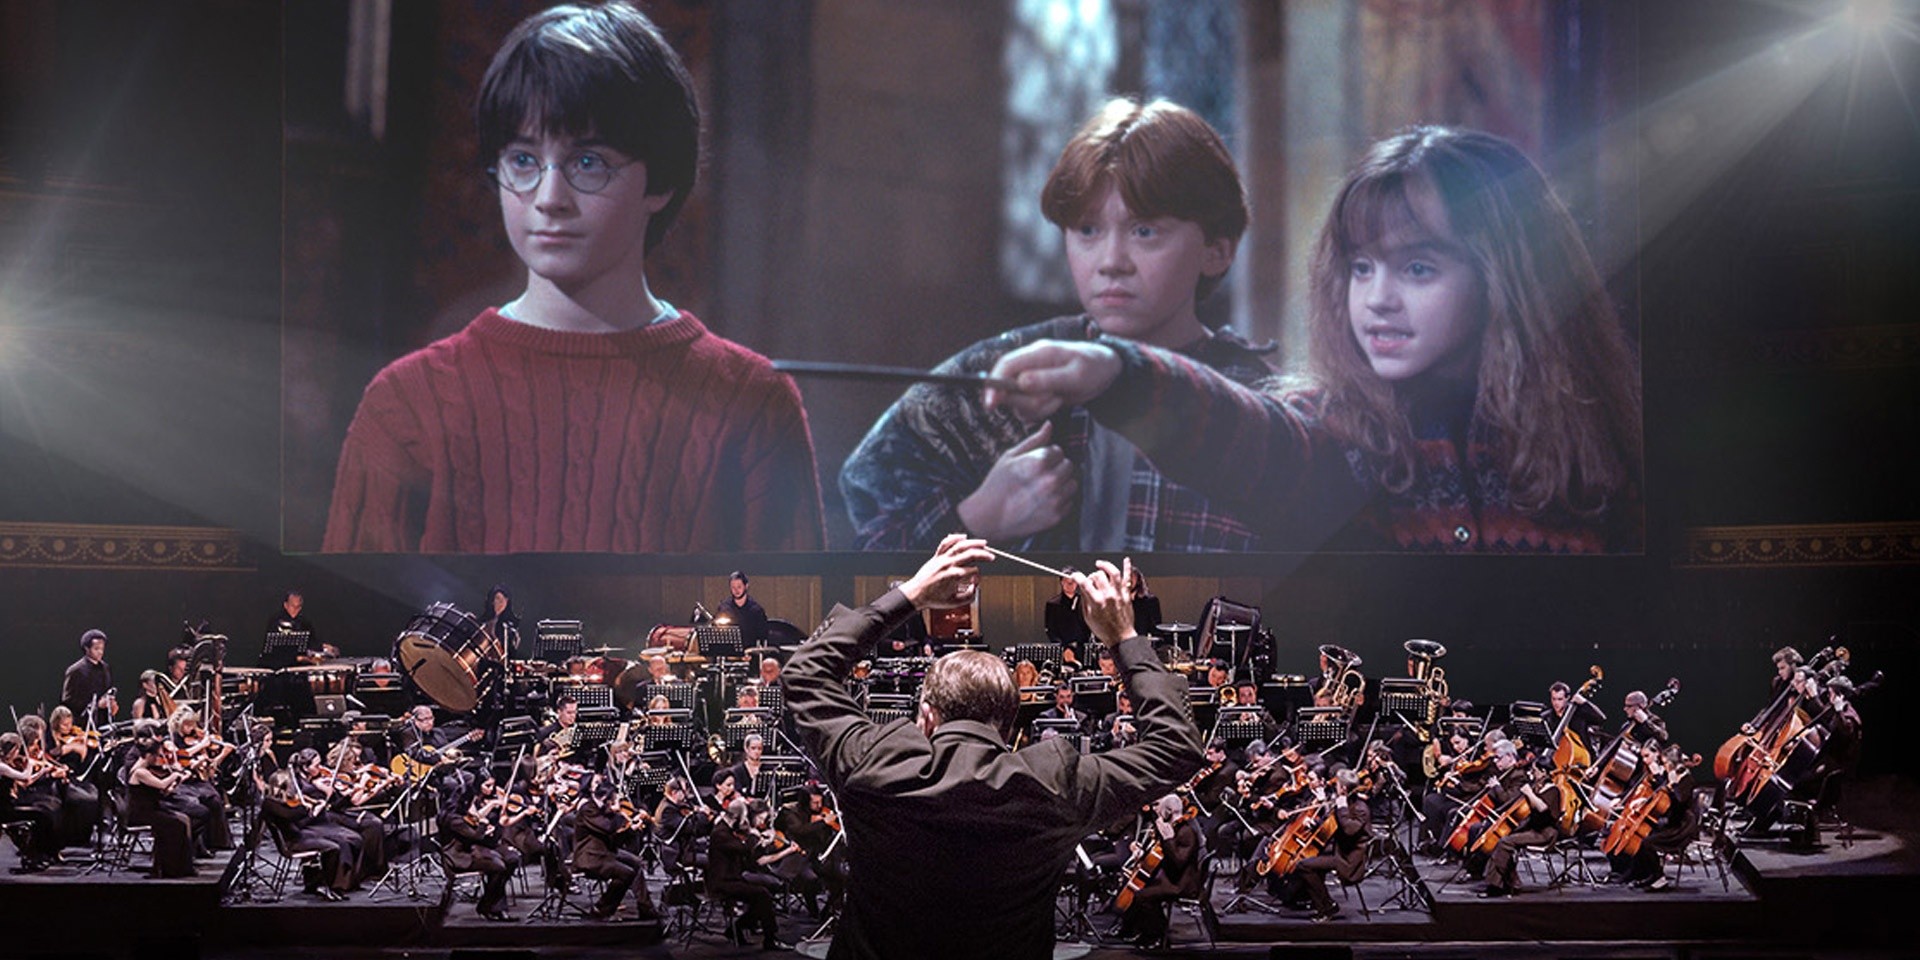 Relive the magic of Harry Potter and the Sorcerer's Stone in concert this September